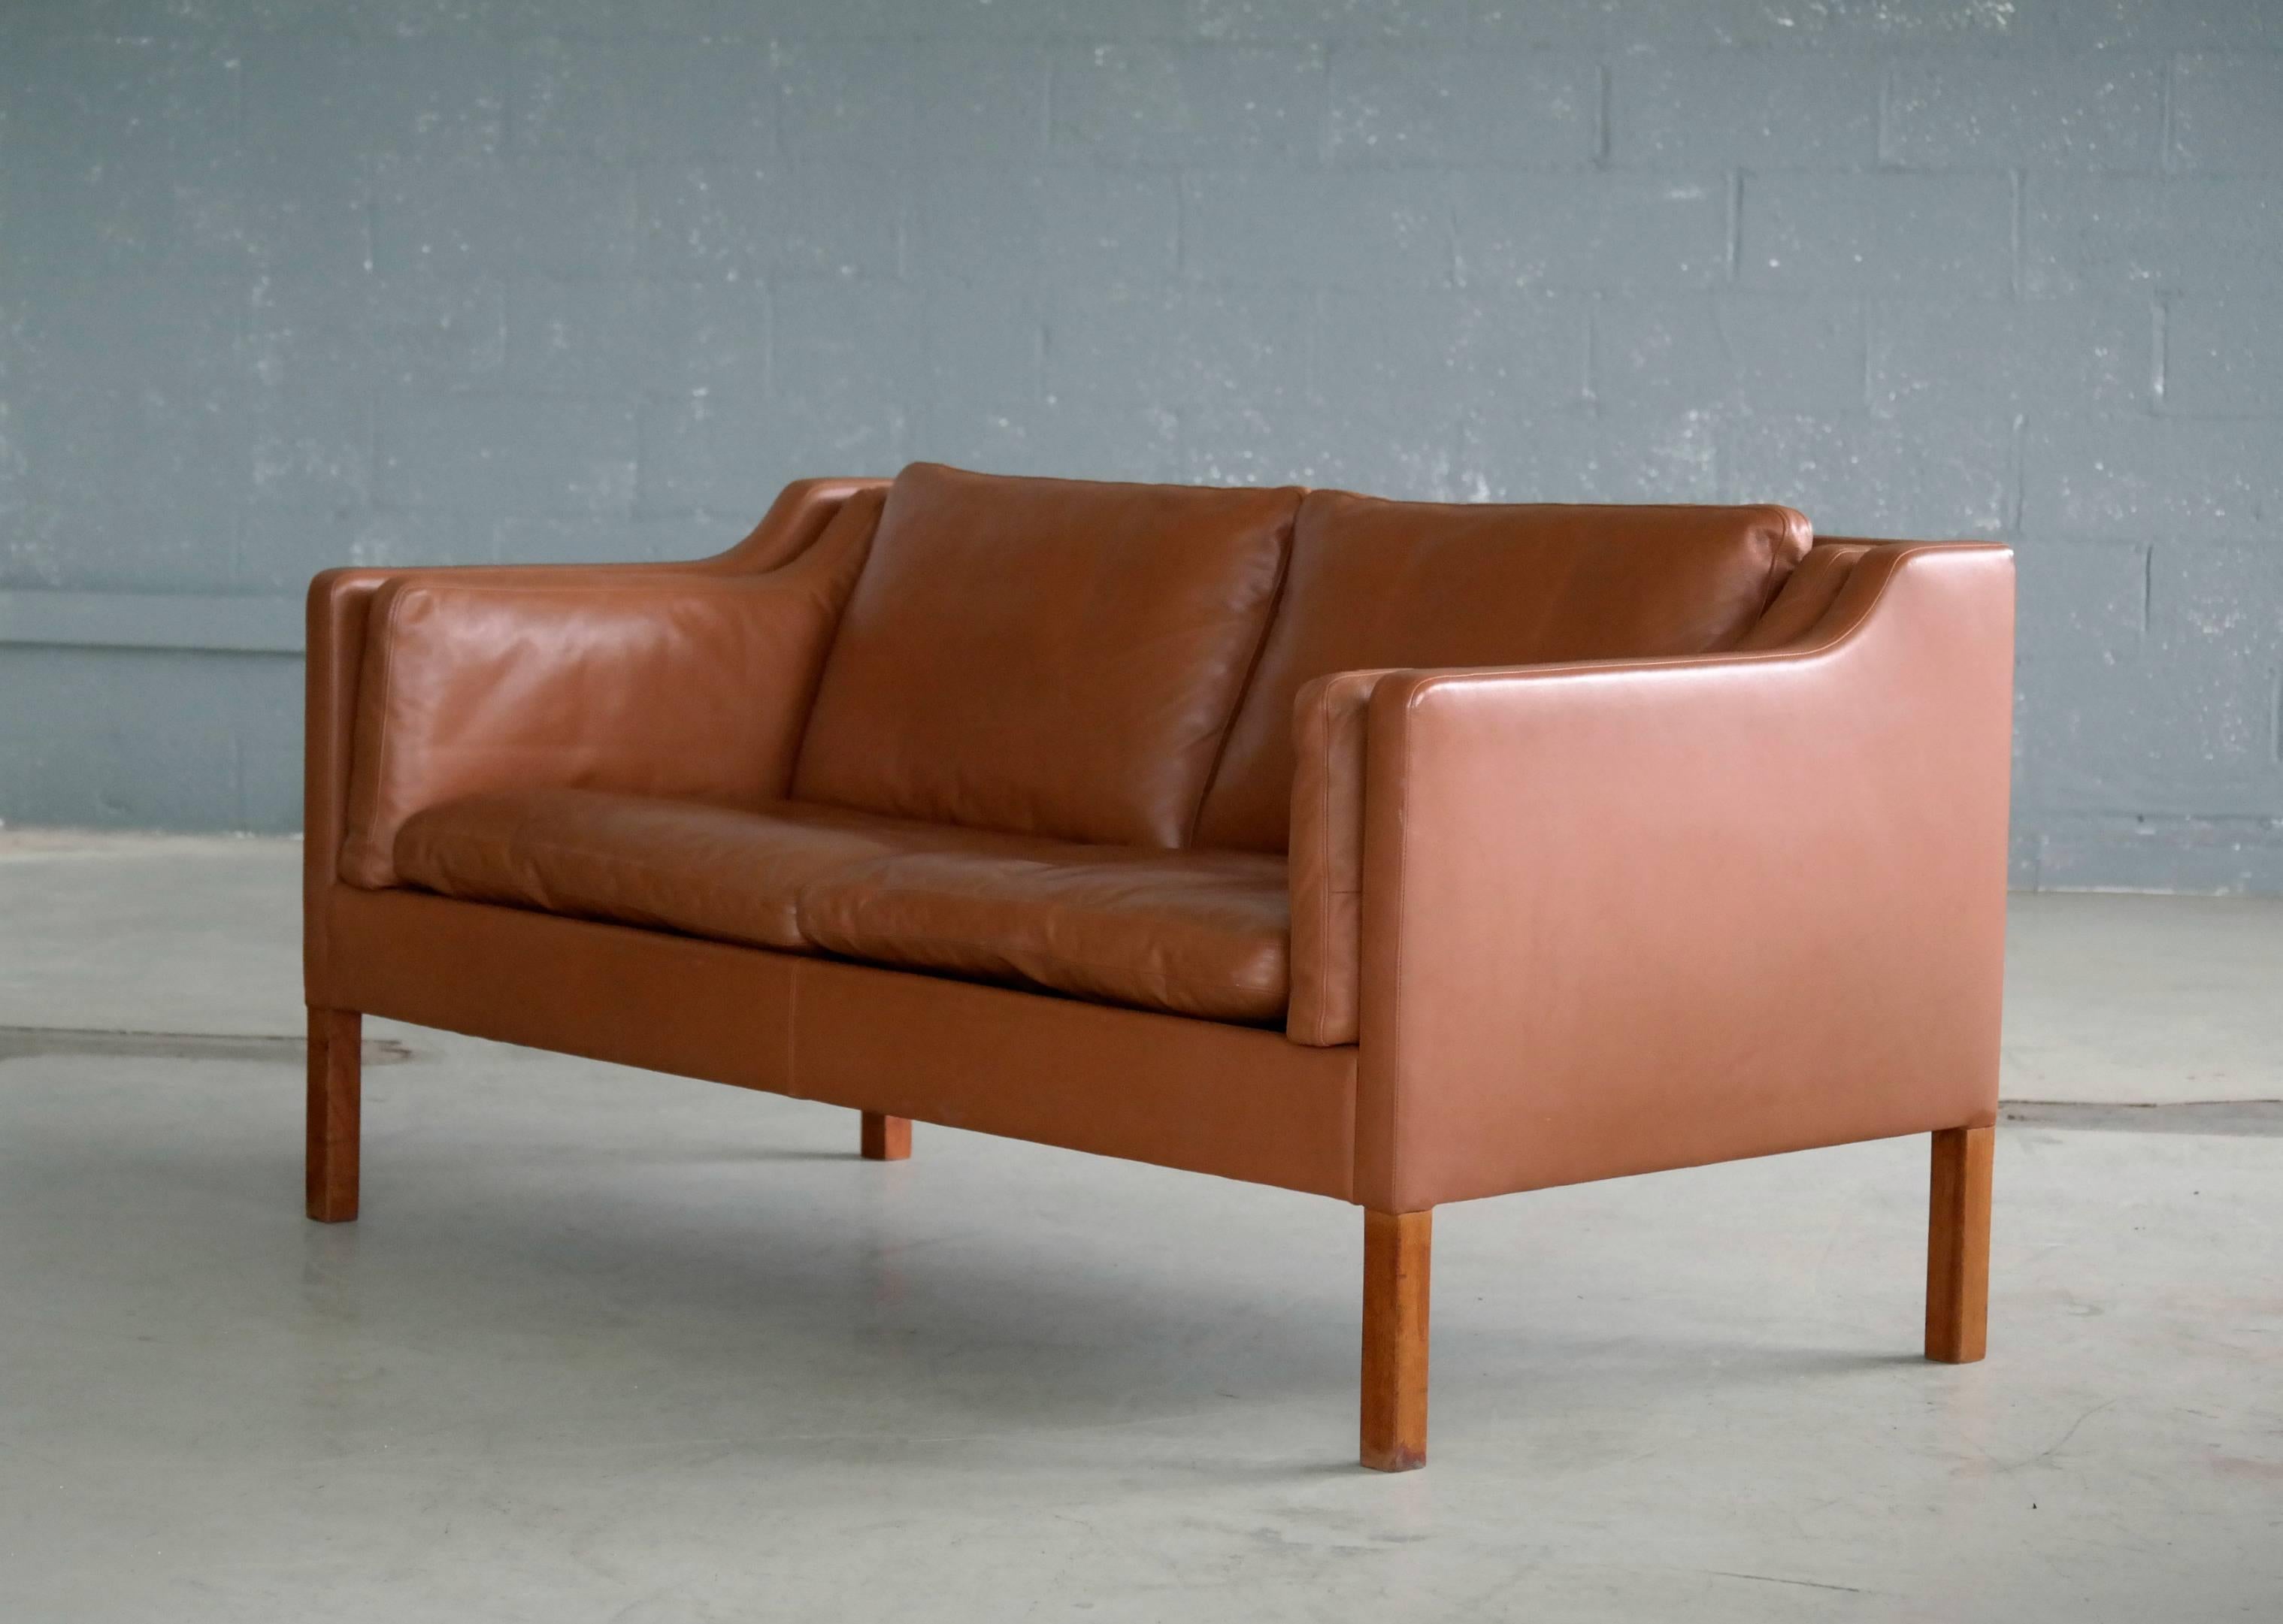 Danish Børge Mogensen Style Two-Seat Sofa in Cognac Leather by Stouby Mobler, Denmark